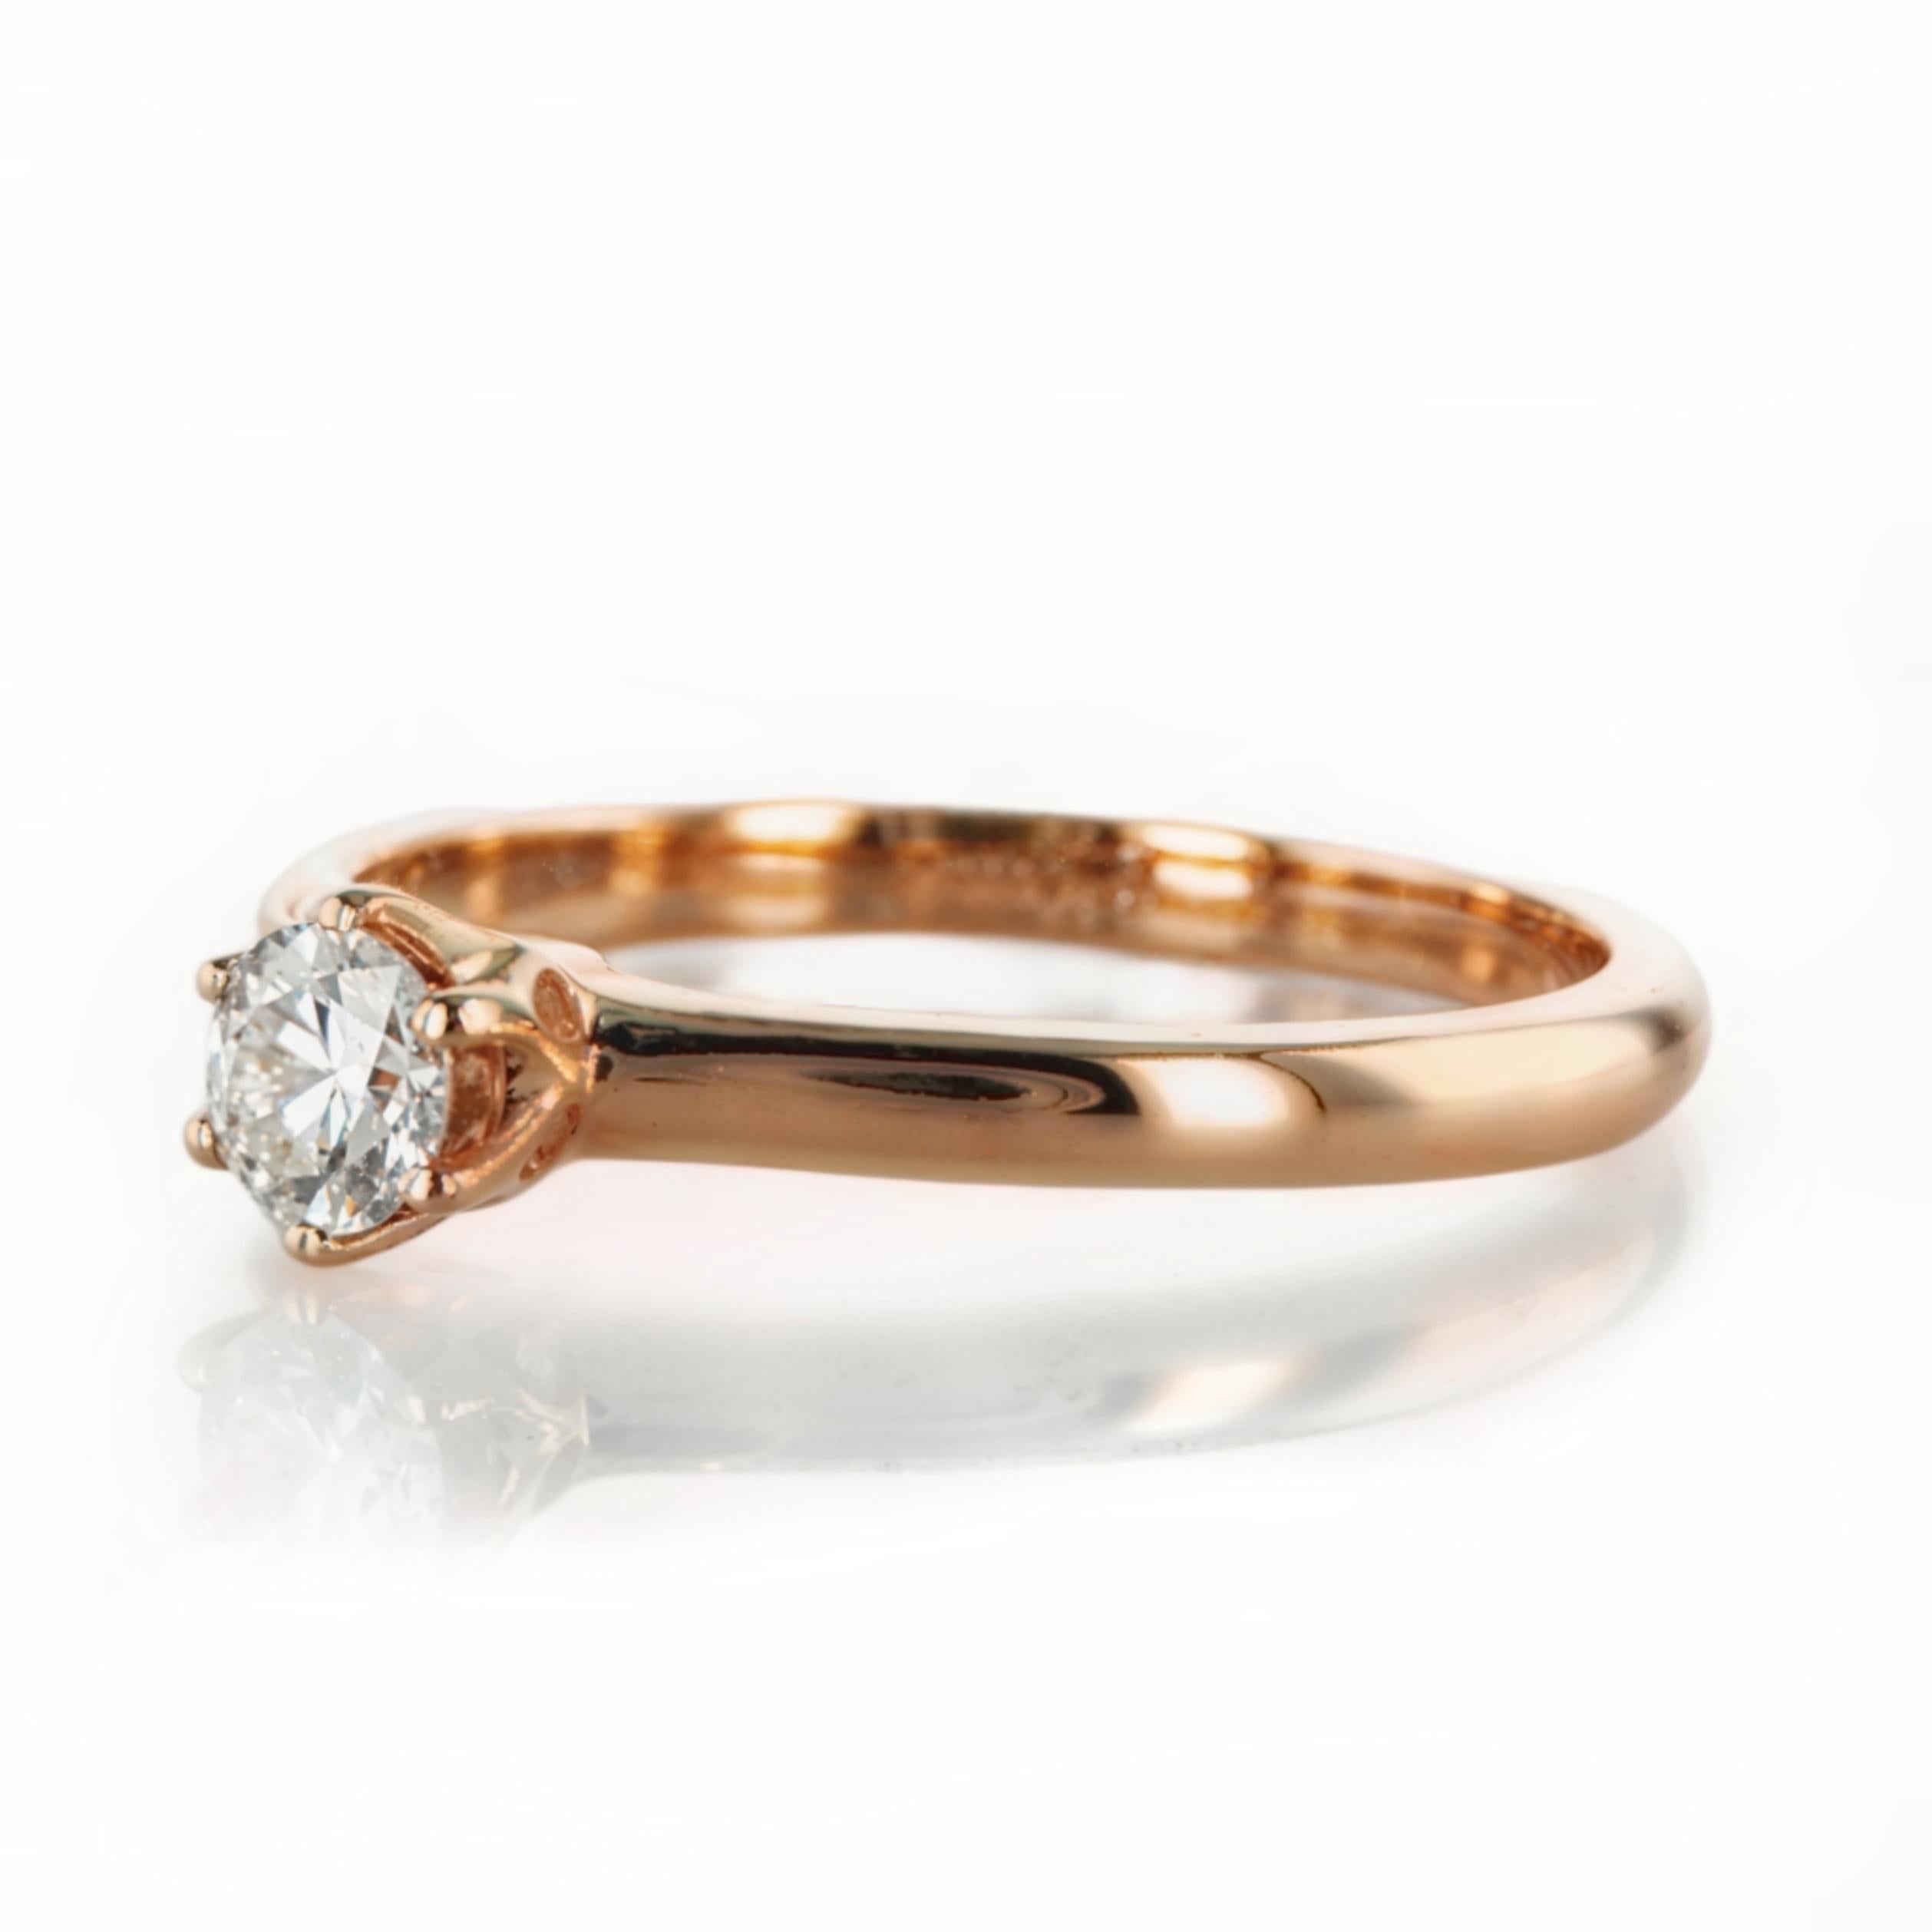 For Sale:  Stunning Classic 0.25 Carat Diamond Solitaire Ring in 14K Gold 5